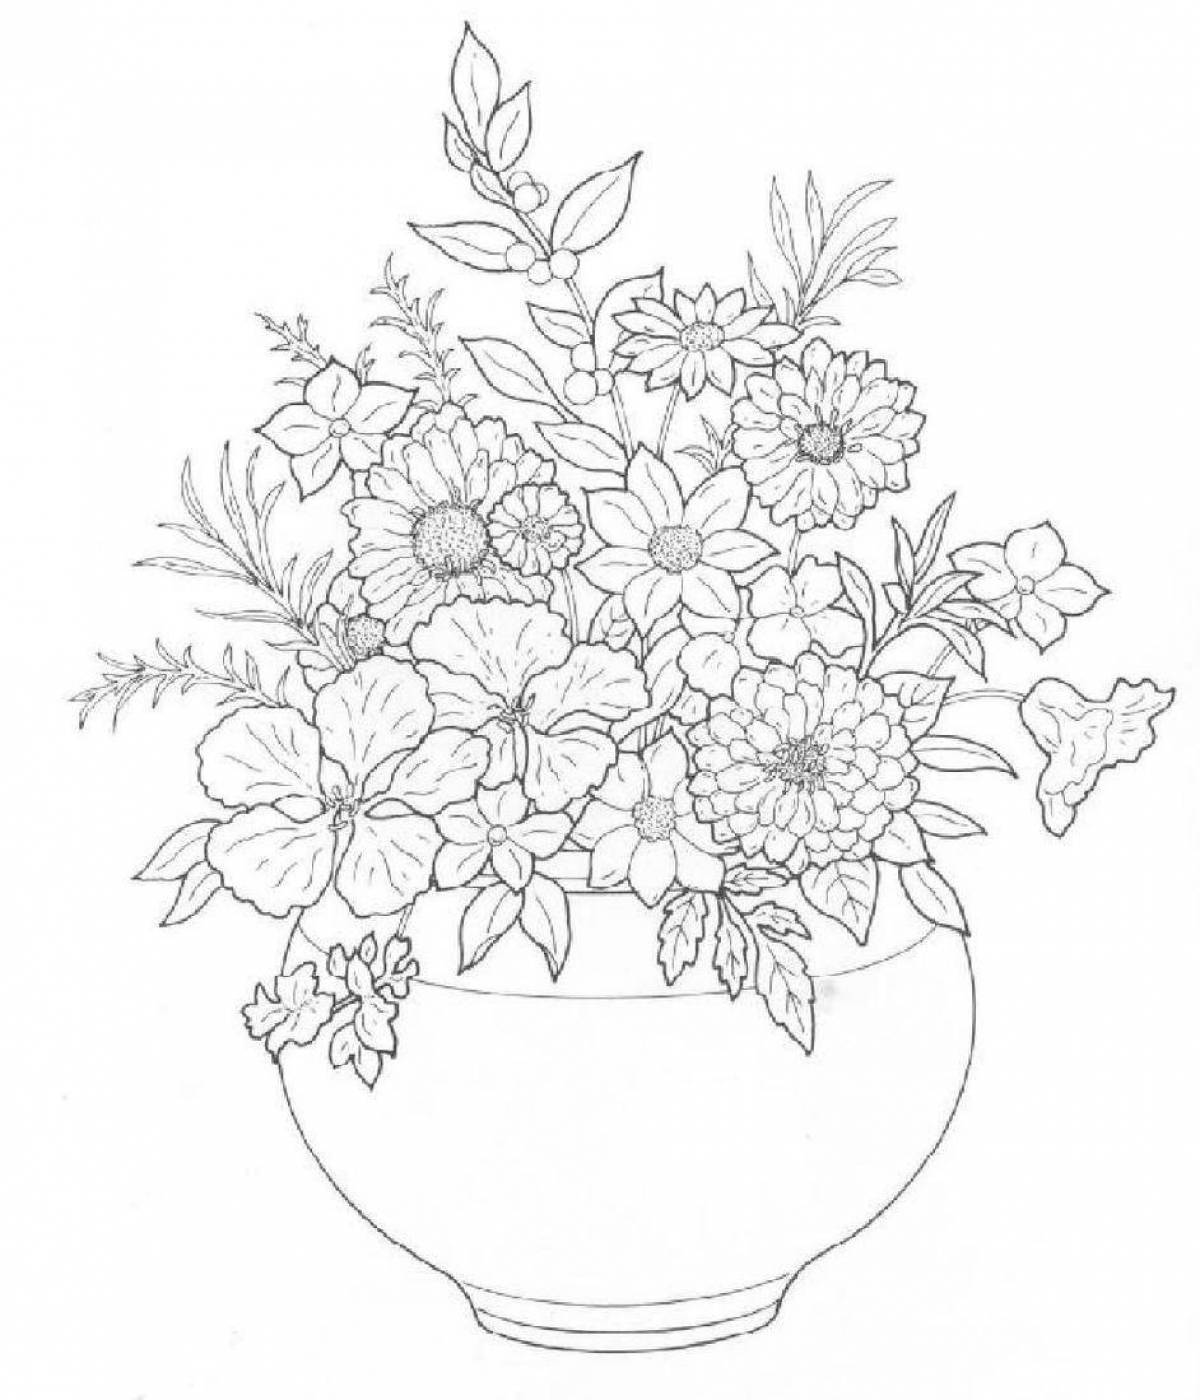 Colorful bouquet of flowers in a vase coloring book